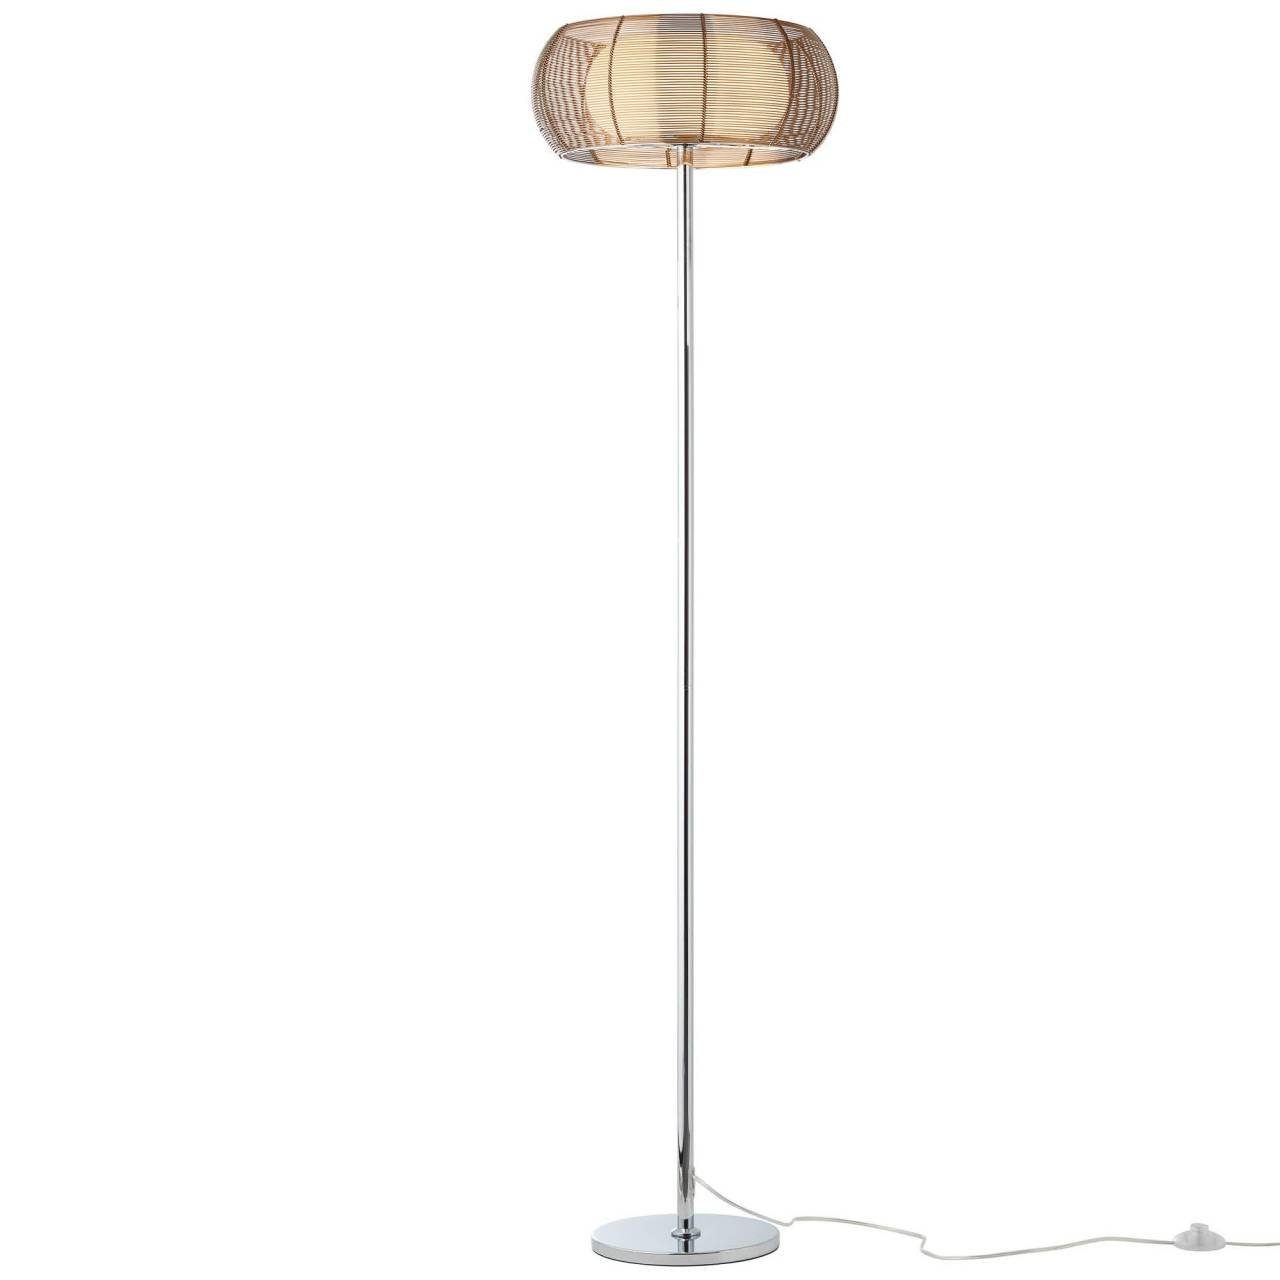 2flg Relax No g.f. 30W, Stehlampe 2x Standleuchte A60, Relax, E27, bronze/chrom Brilliant Lampe